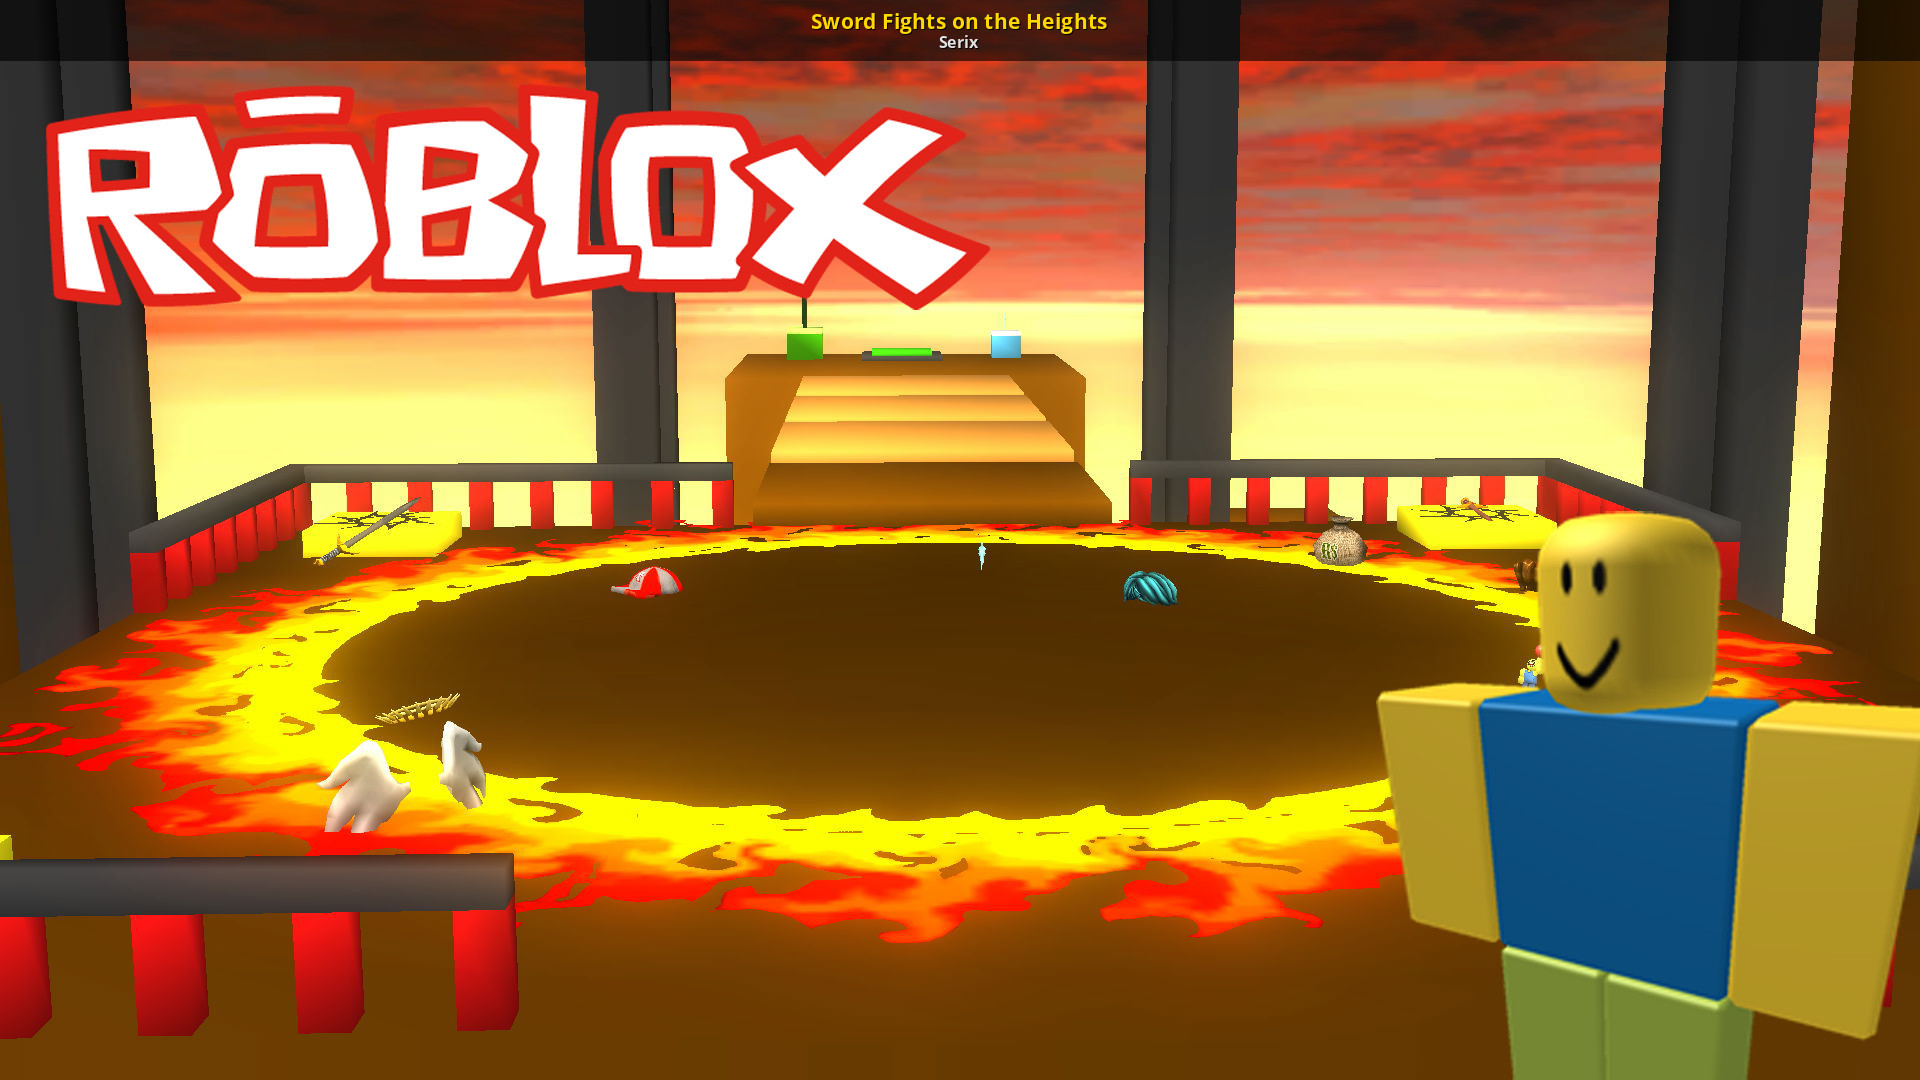 Fighter roblox. Roblox Sword Fight on the heights. Меч РОБЛОКС. РОБЛОКС файт. РОБЛОКС Fights.